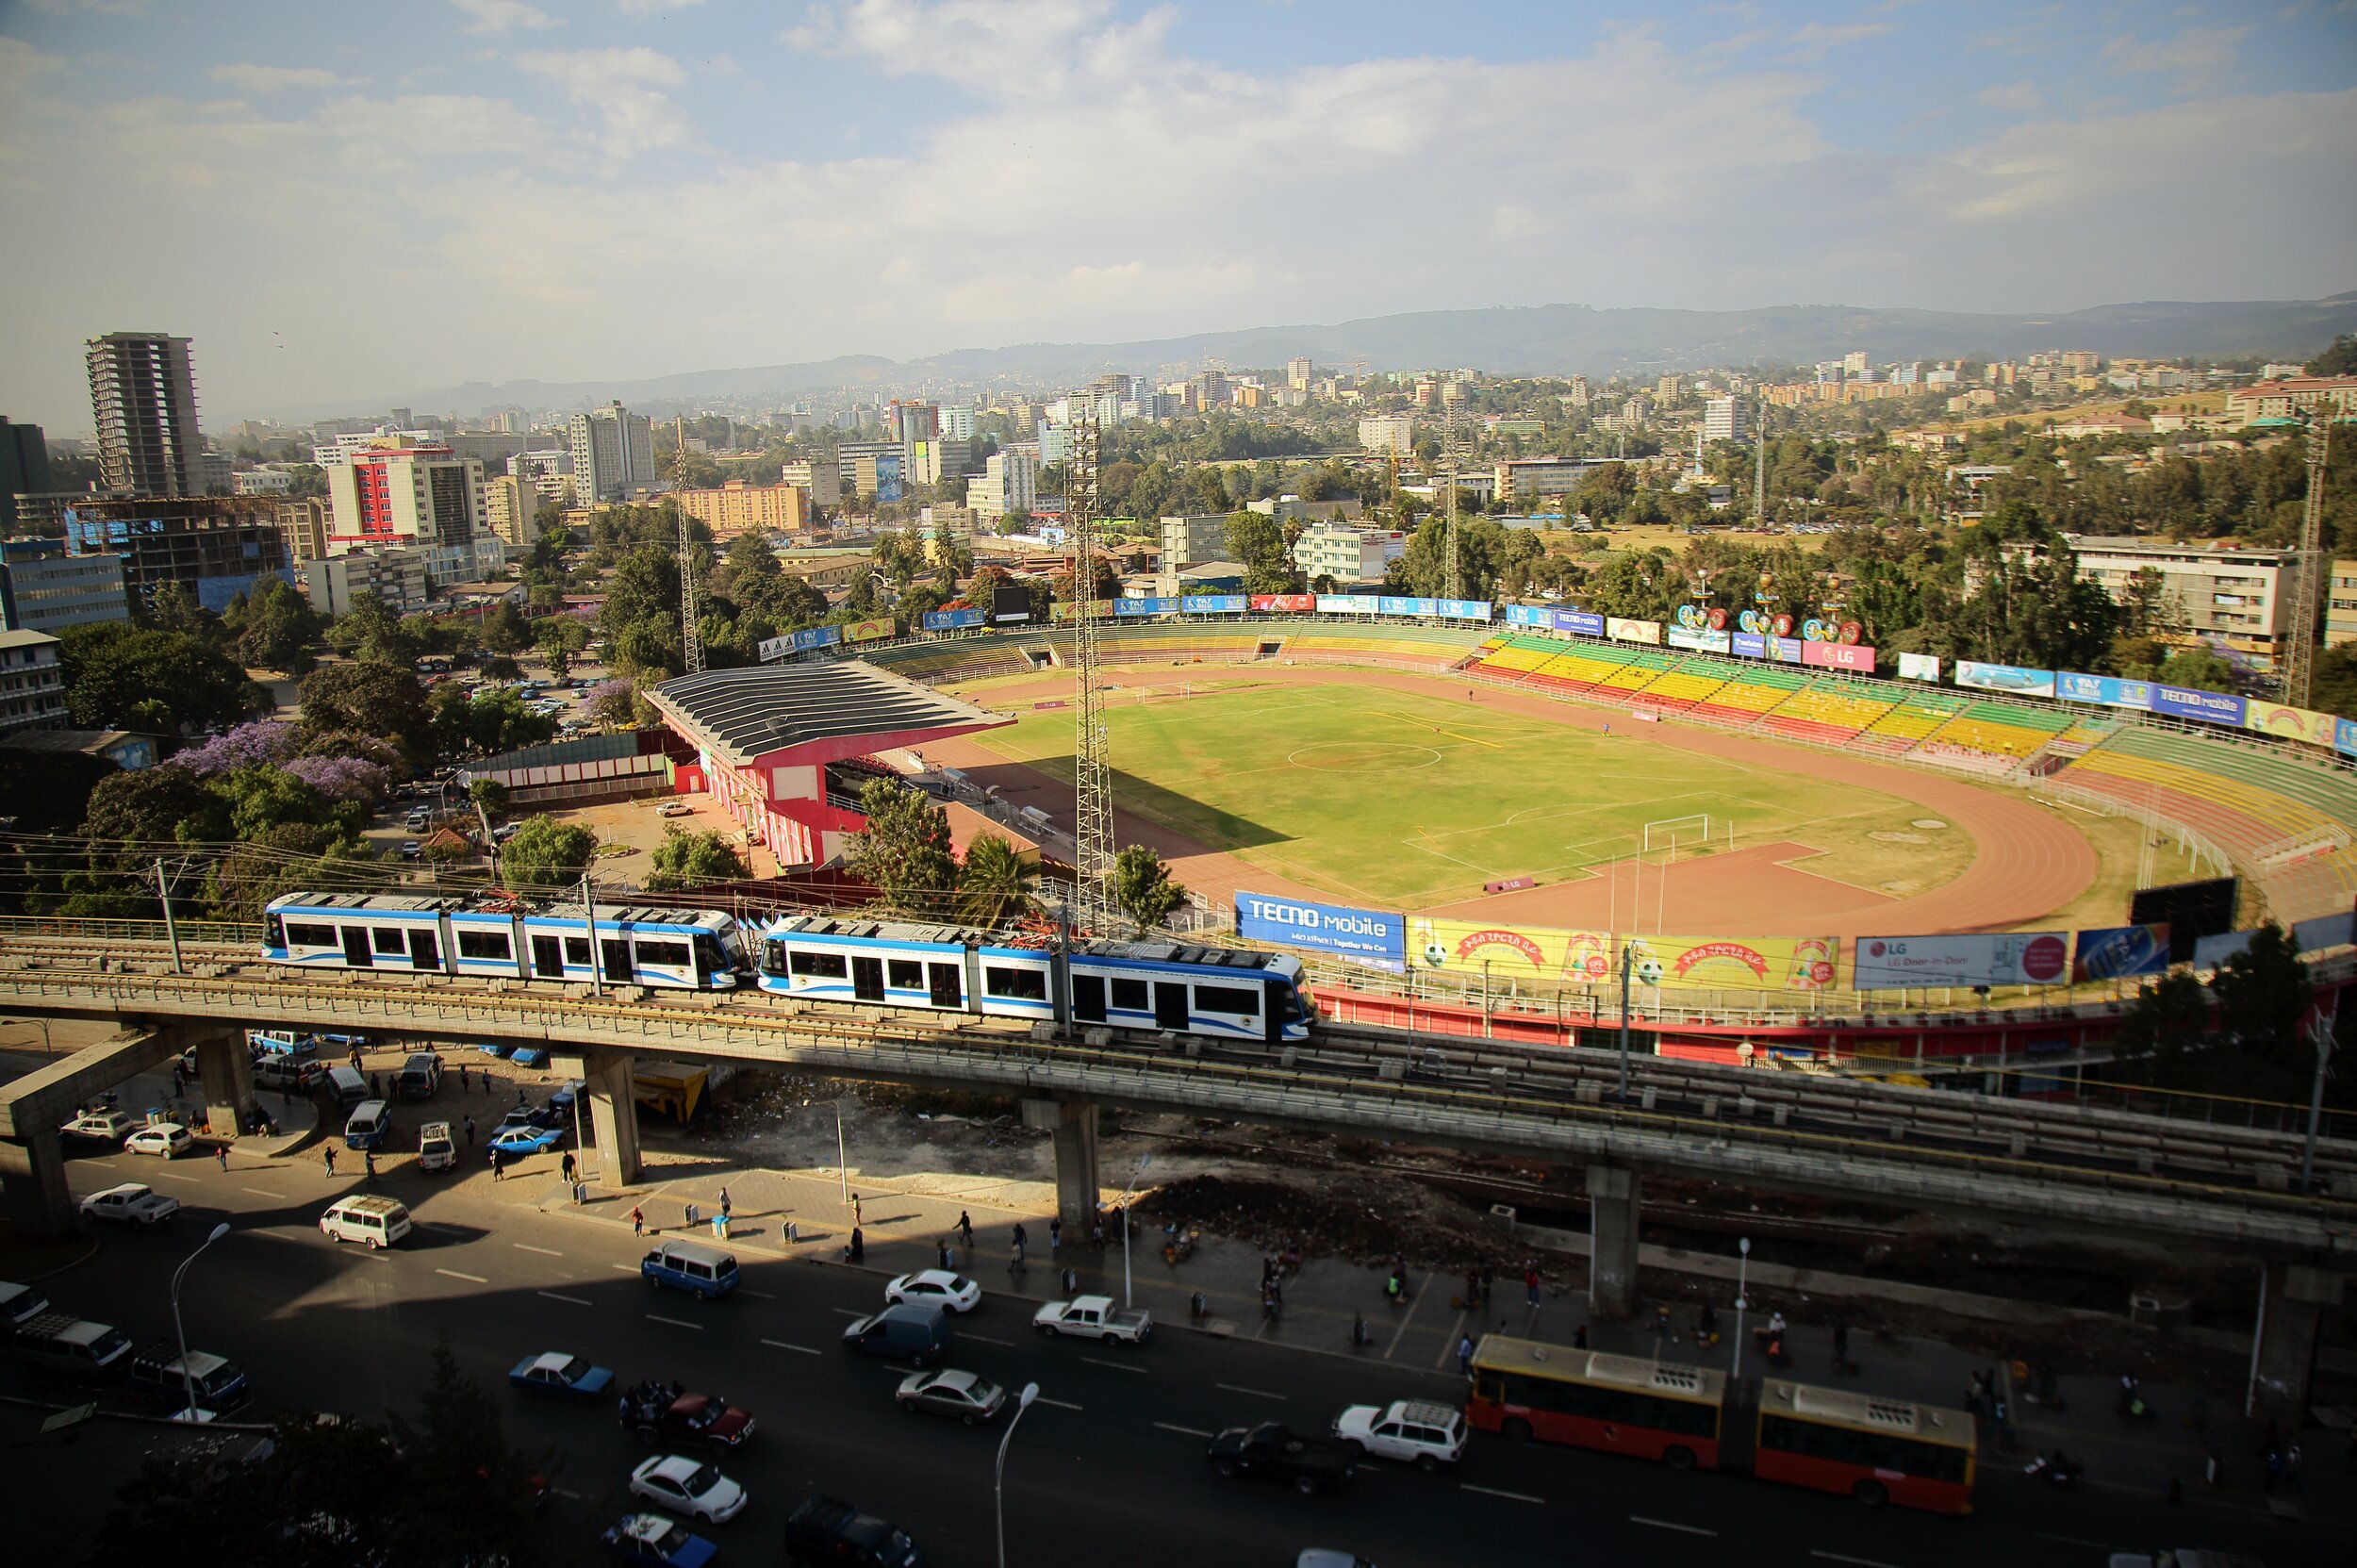  The new light rail system is a milestone in Addis Ababa’s transformation process.   